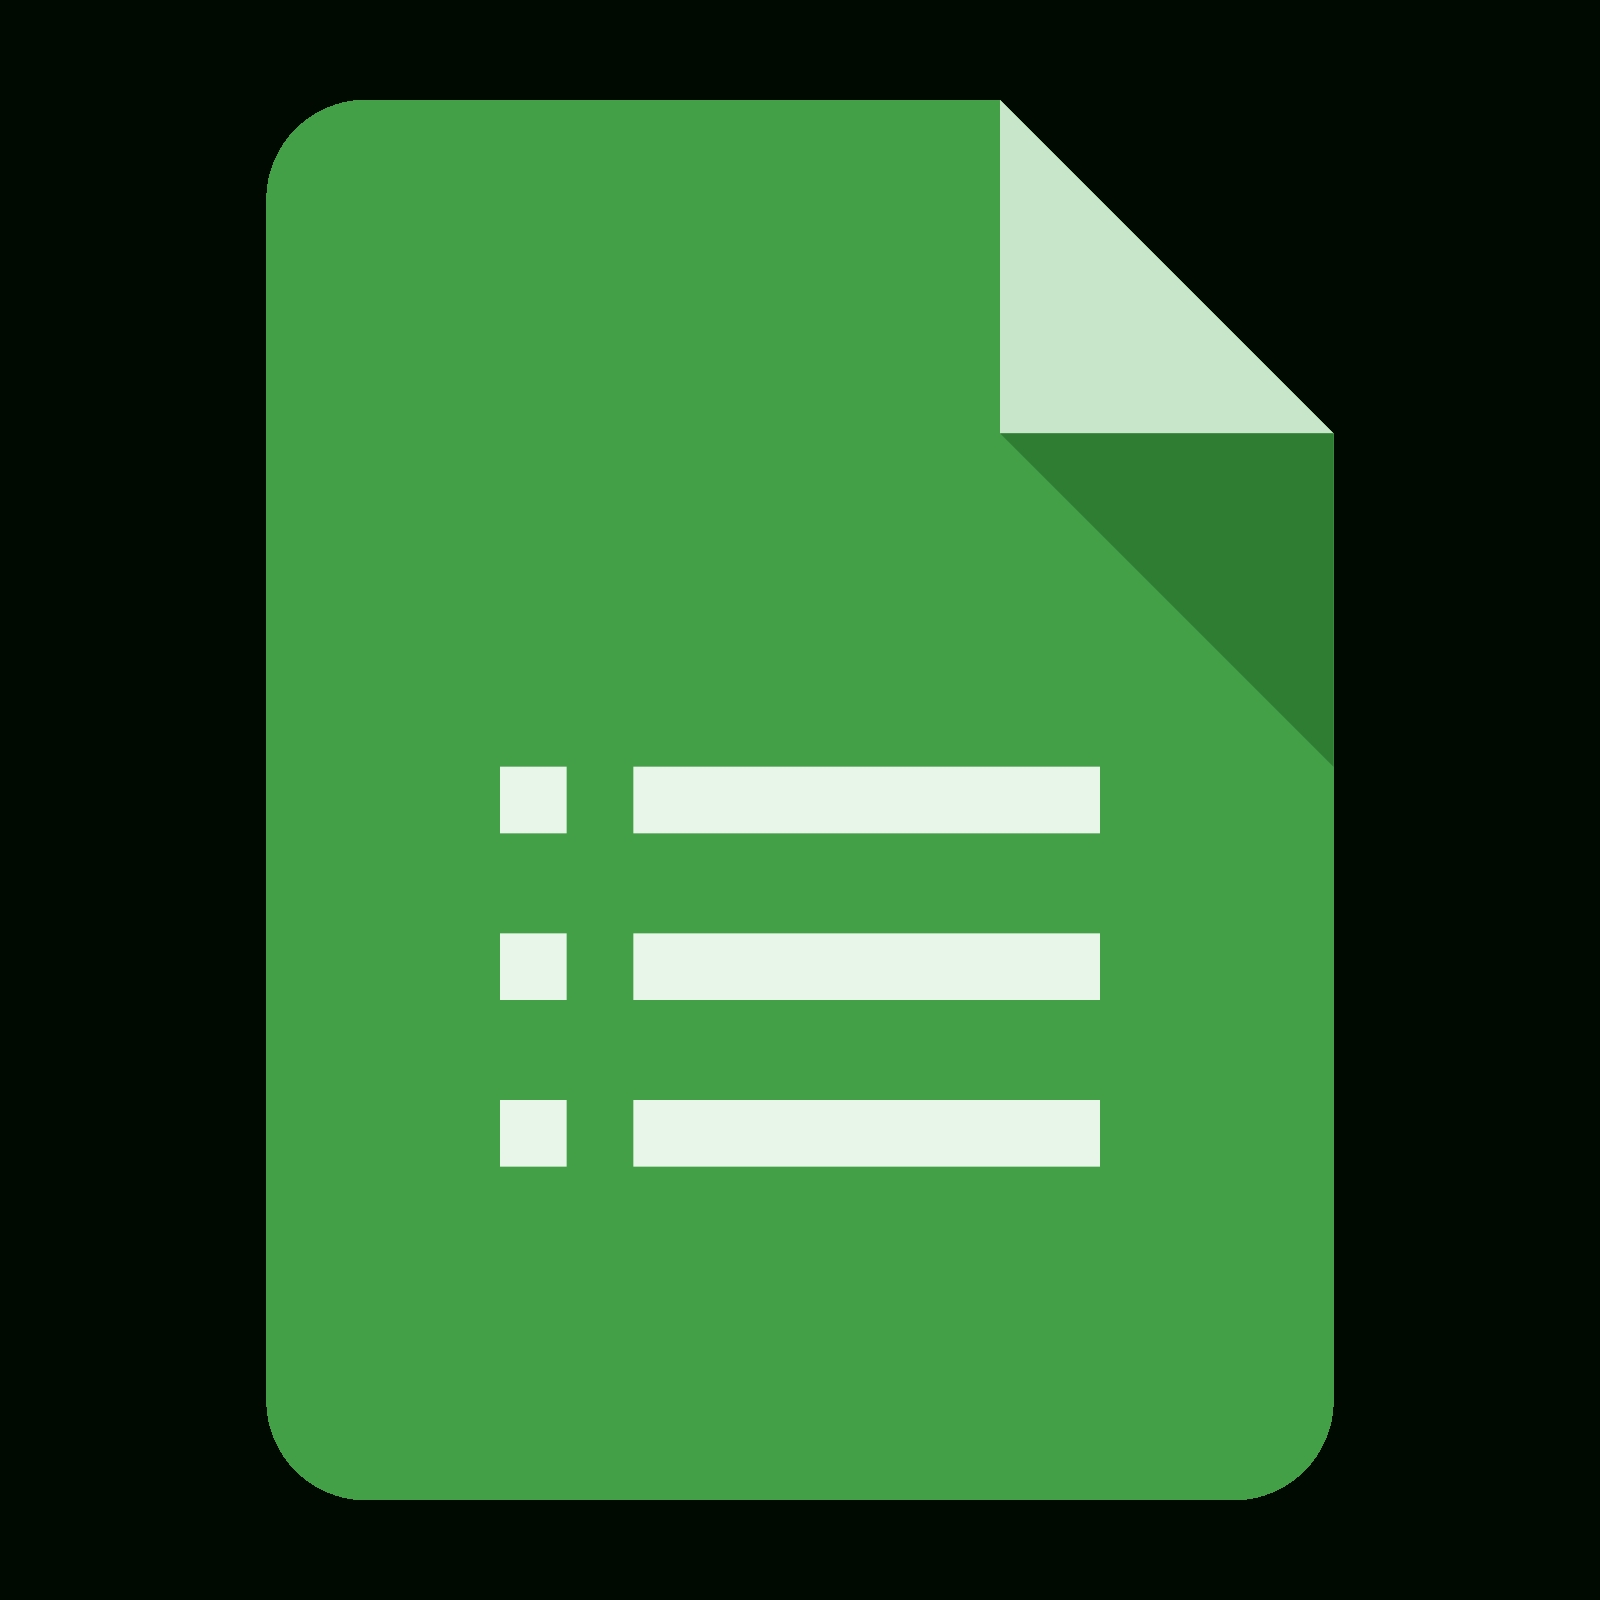 Apps Google Drive Forms Icon | Flatwoken Iconset | alecive